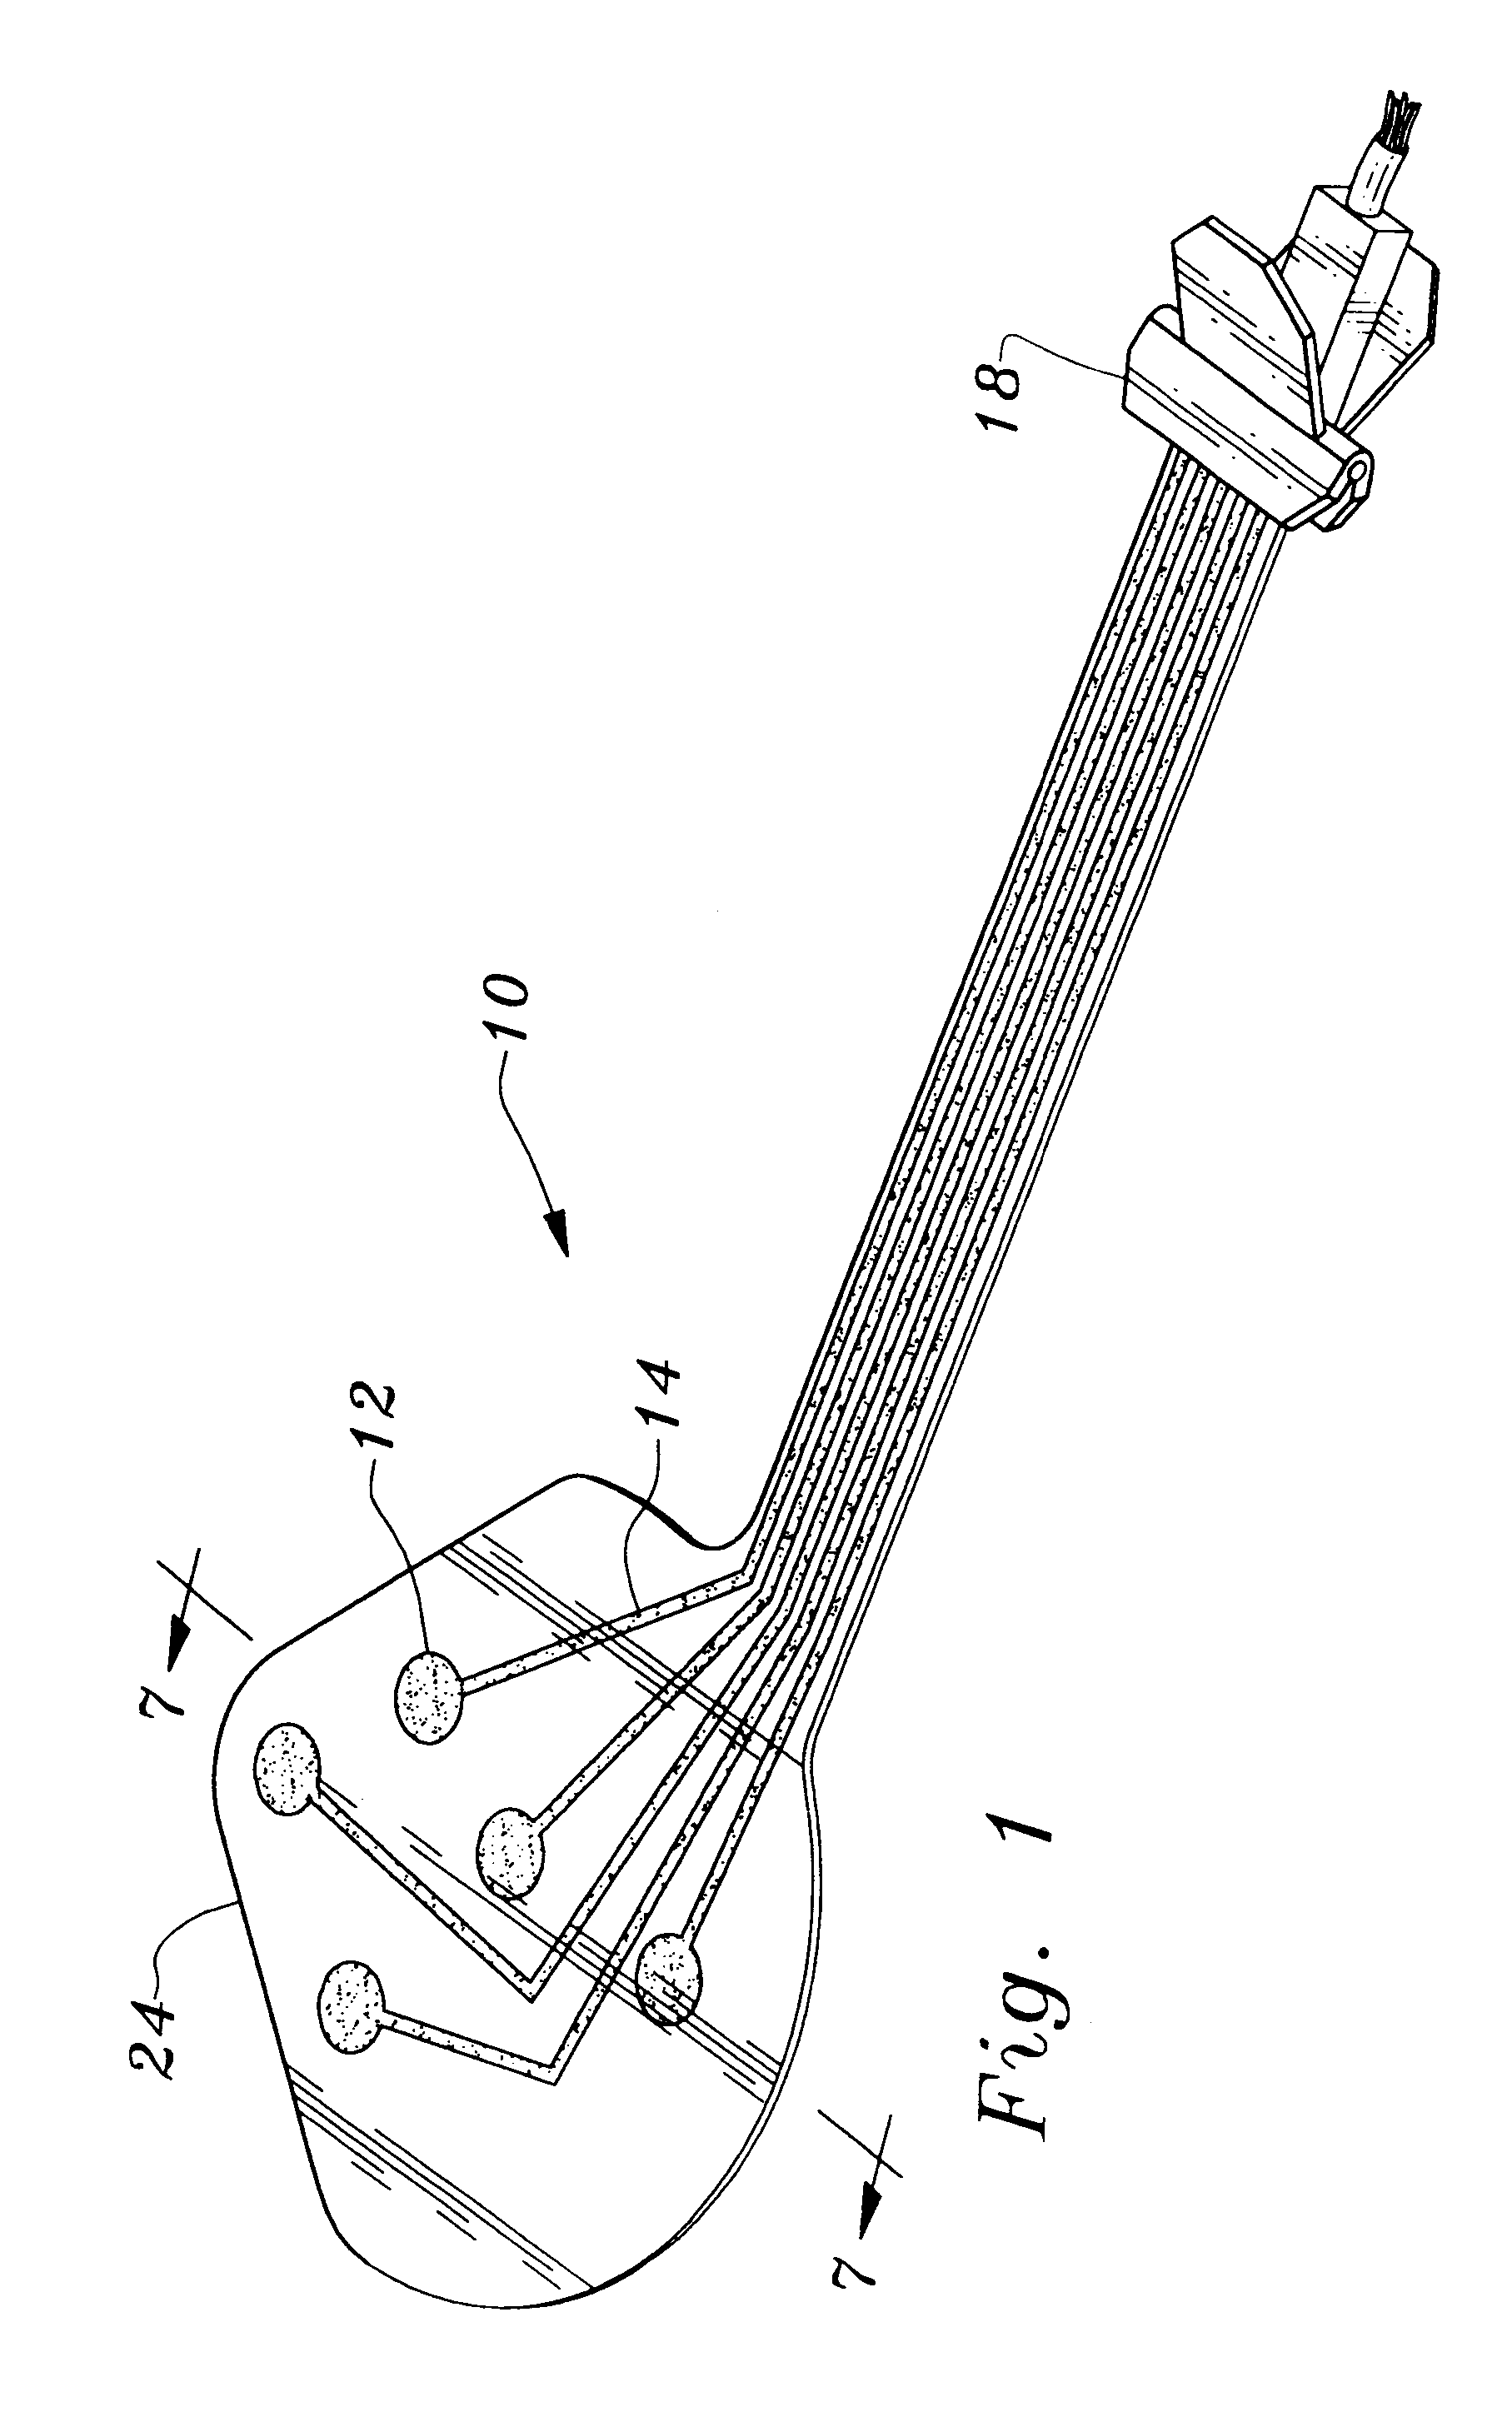 Electrode assembly and method for signaling a monitor